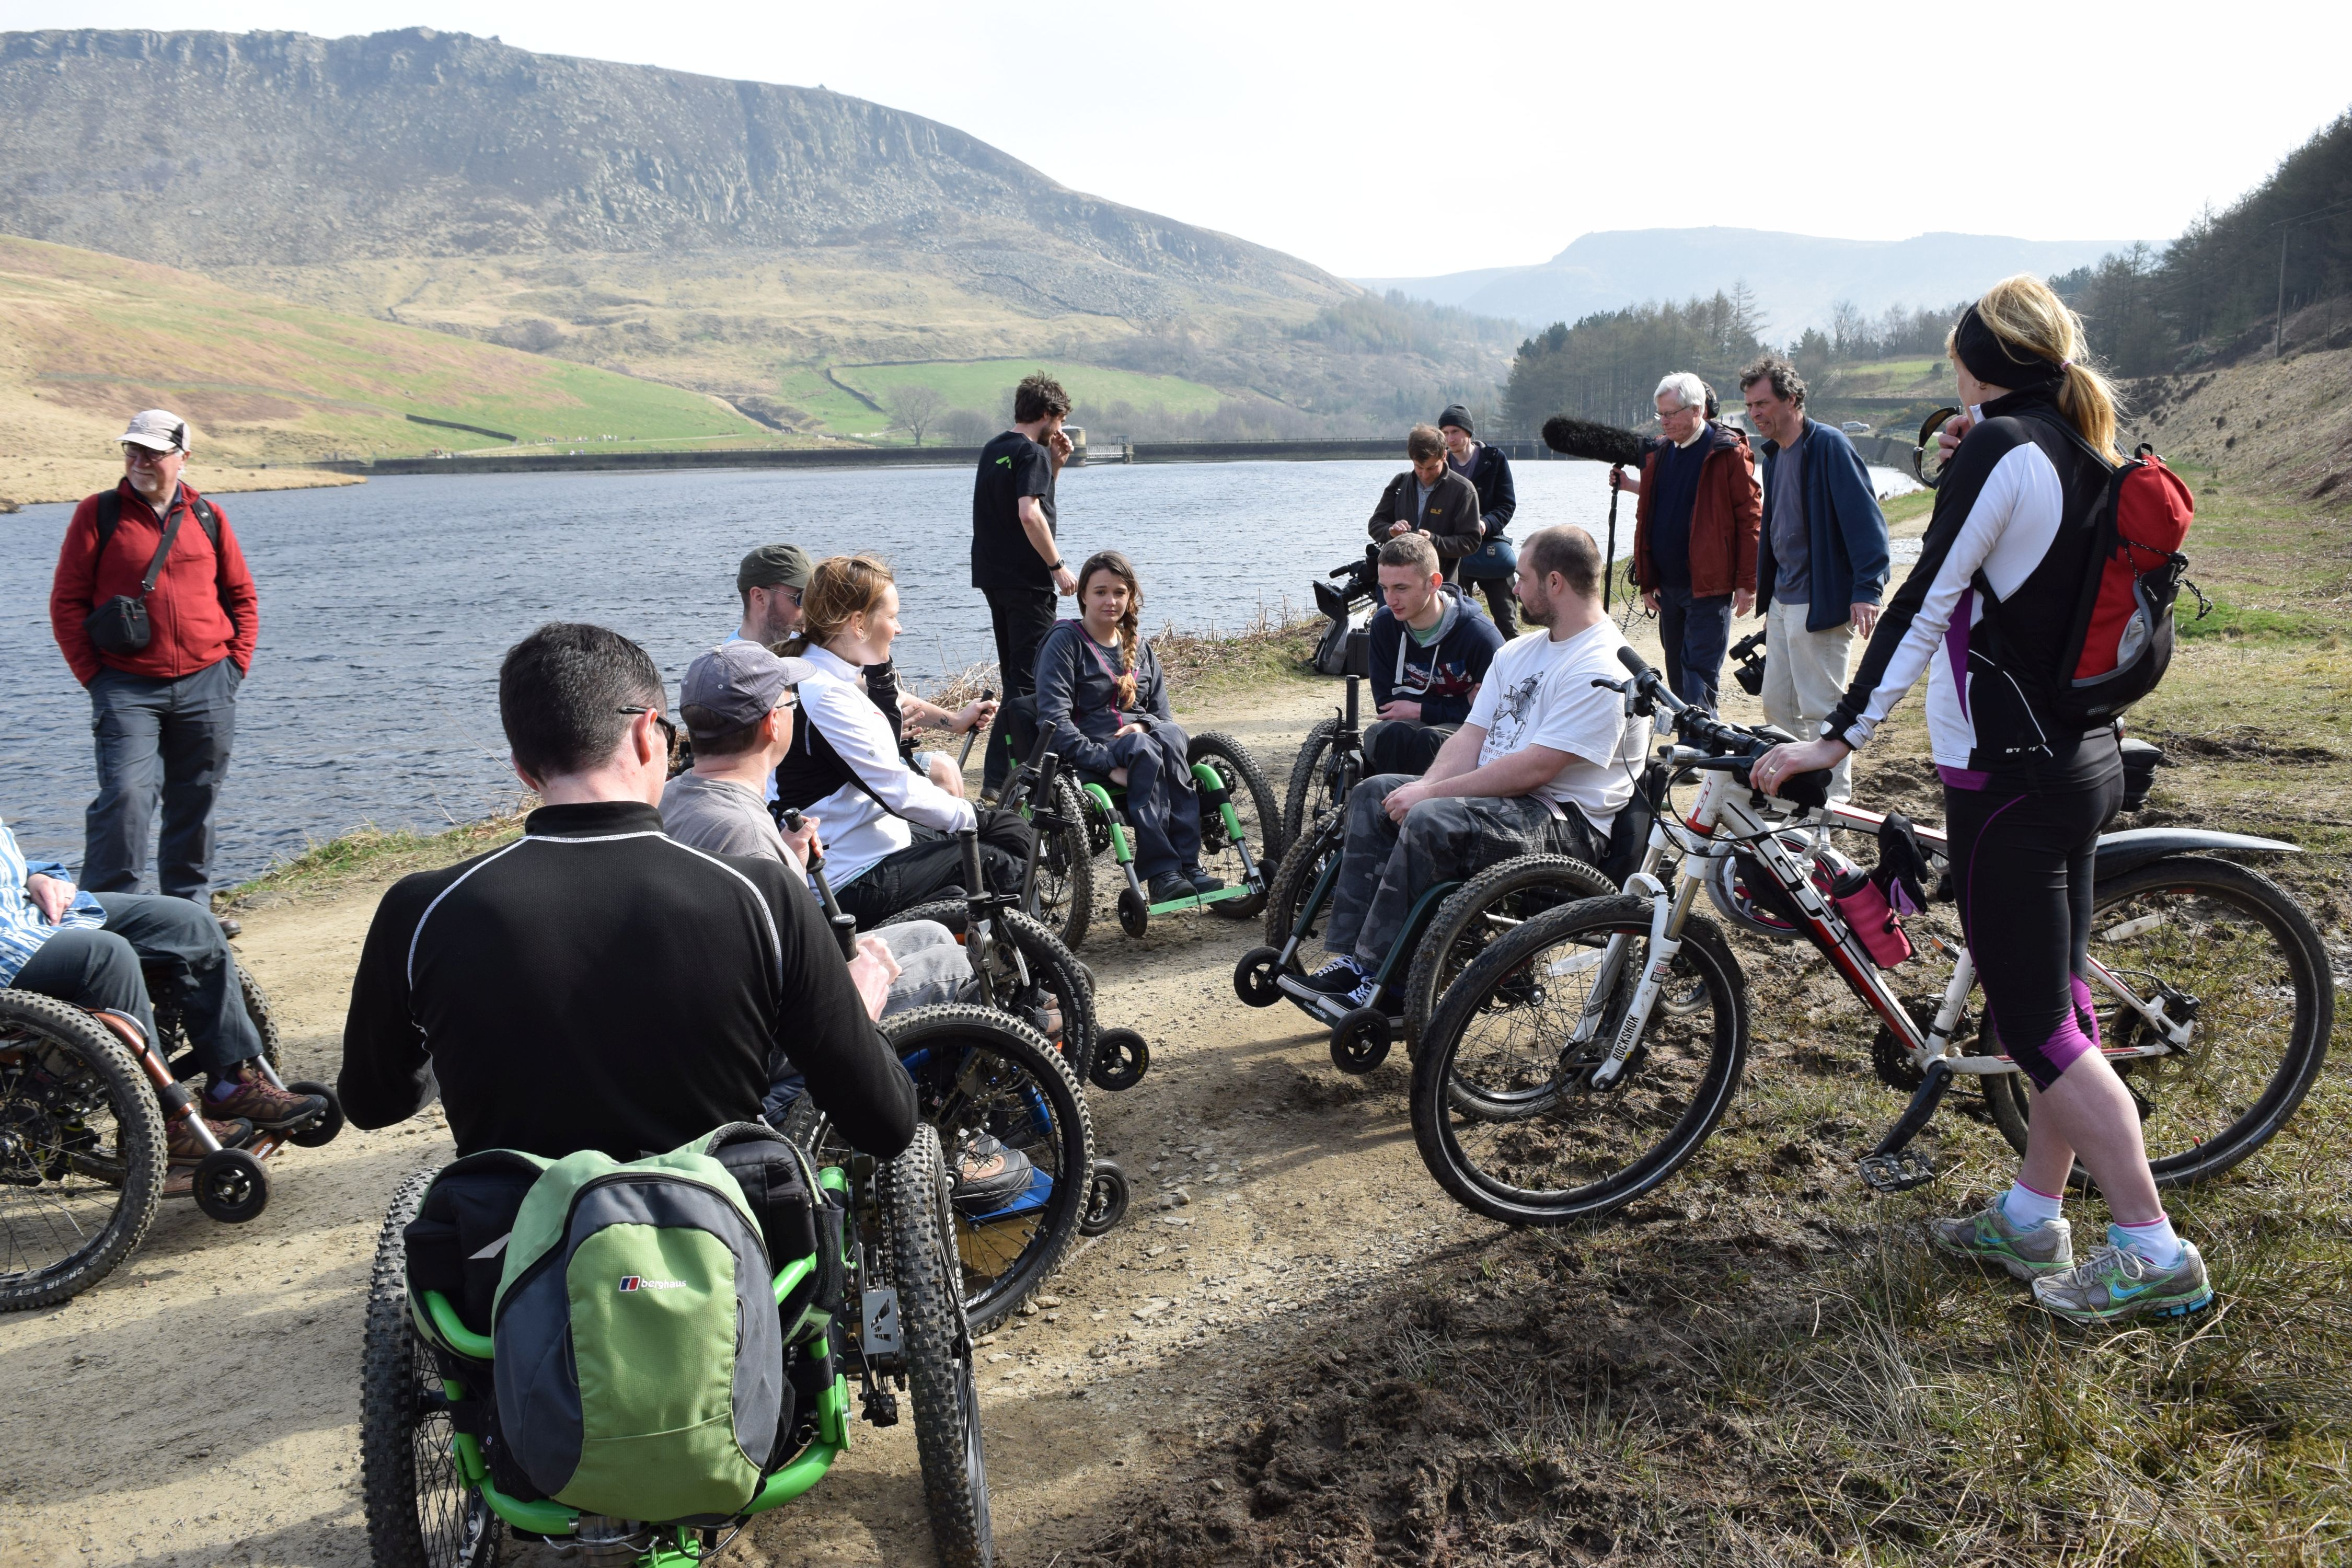 Take a look at our Mountain Trike wheelchair customer experiences video